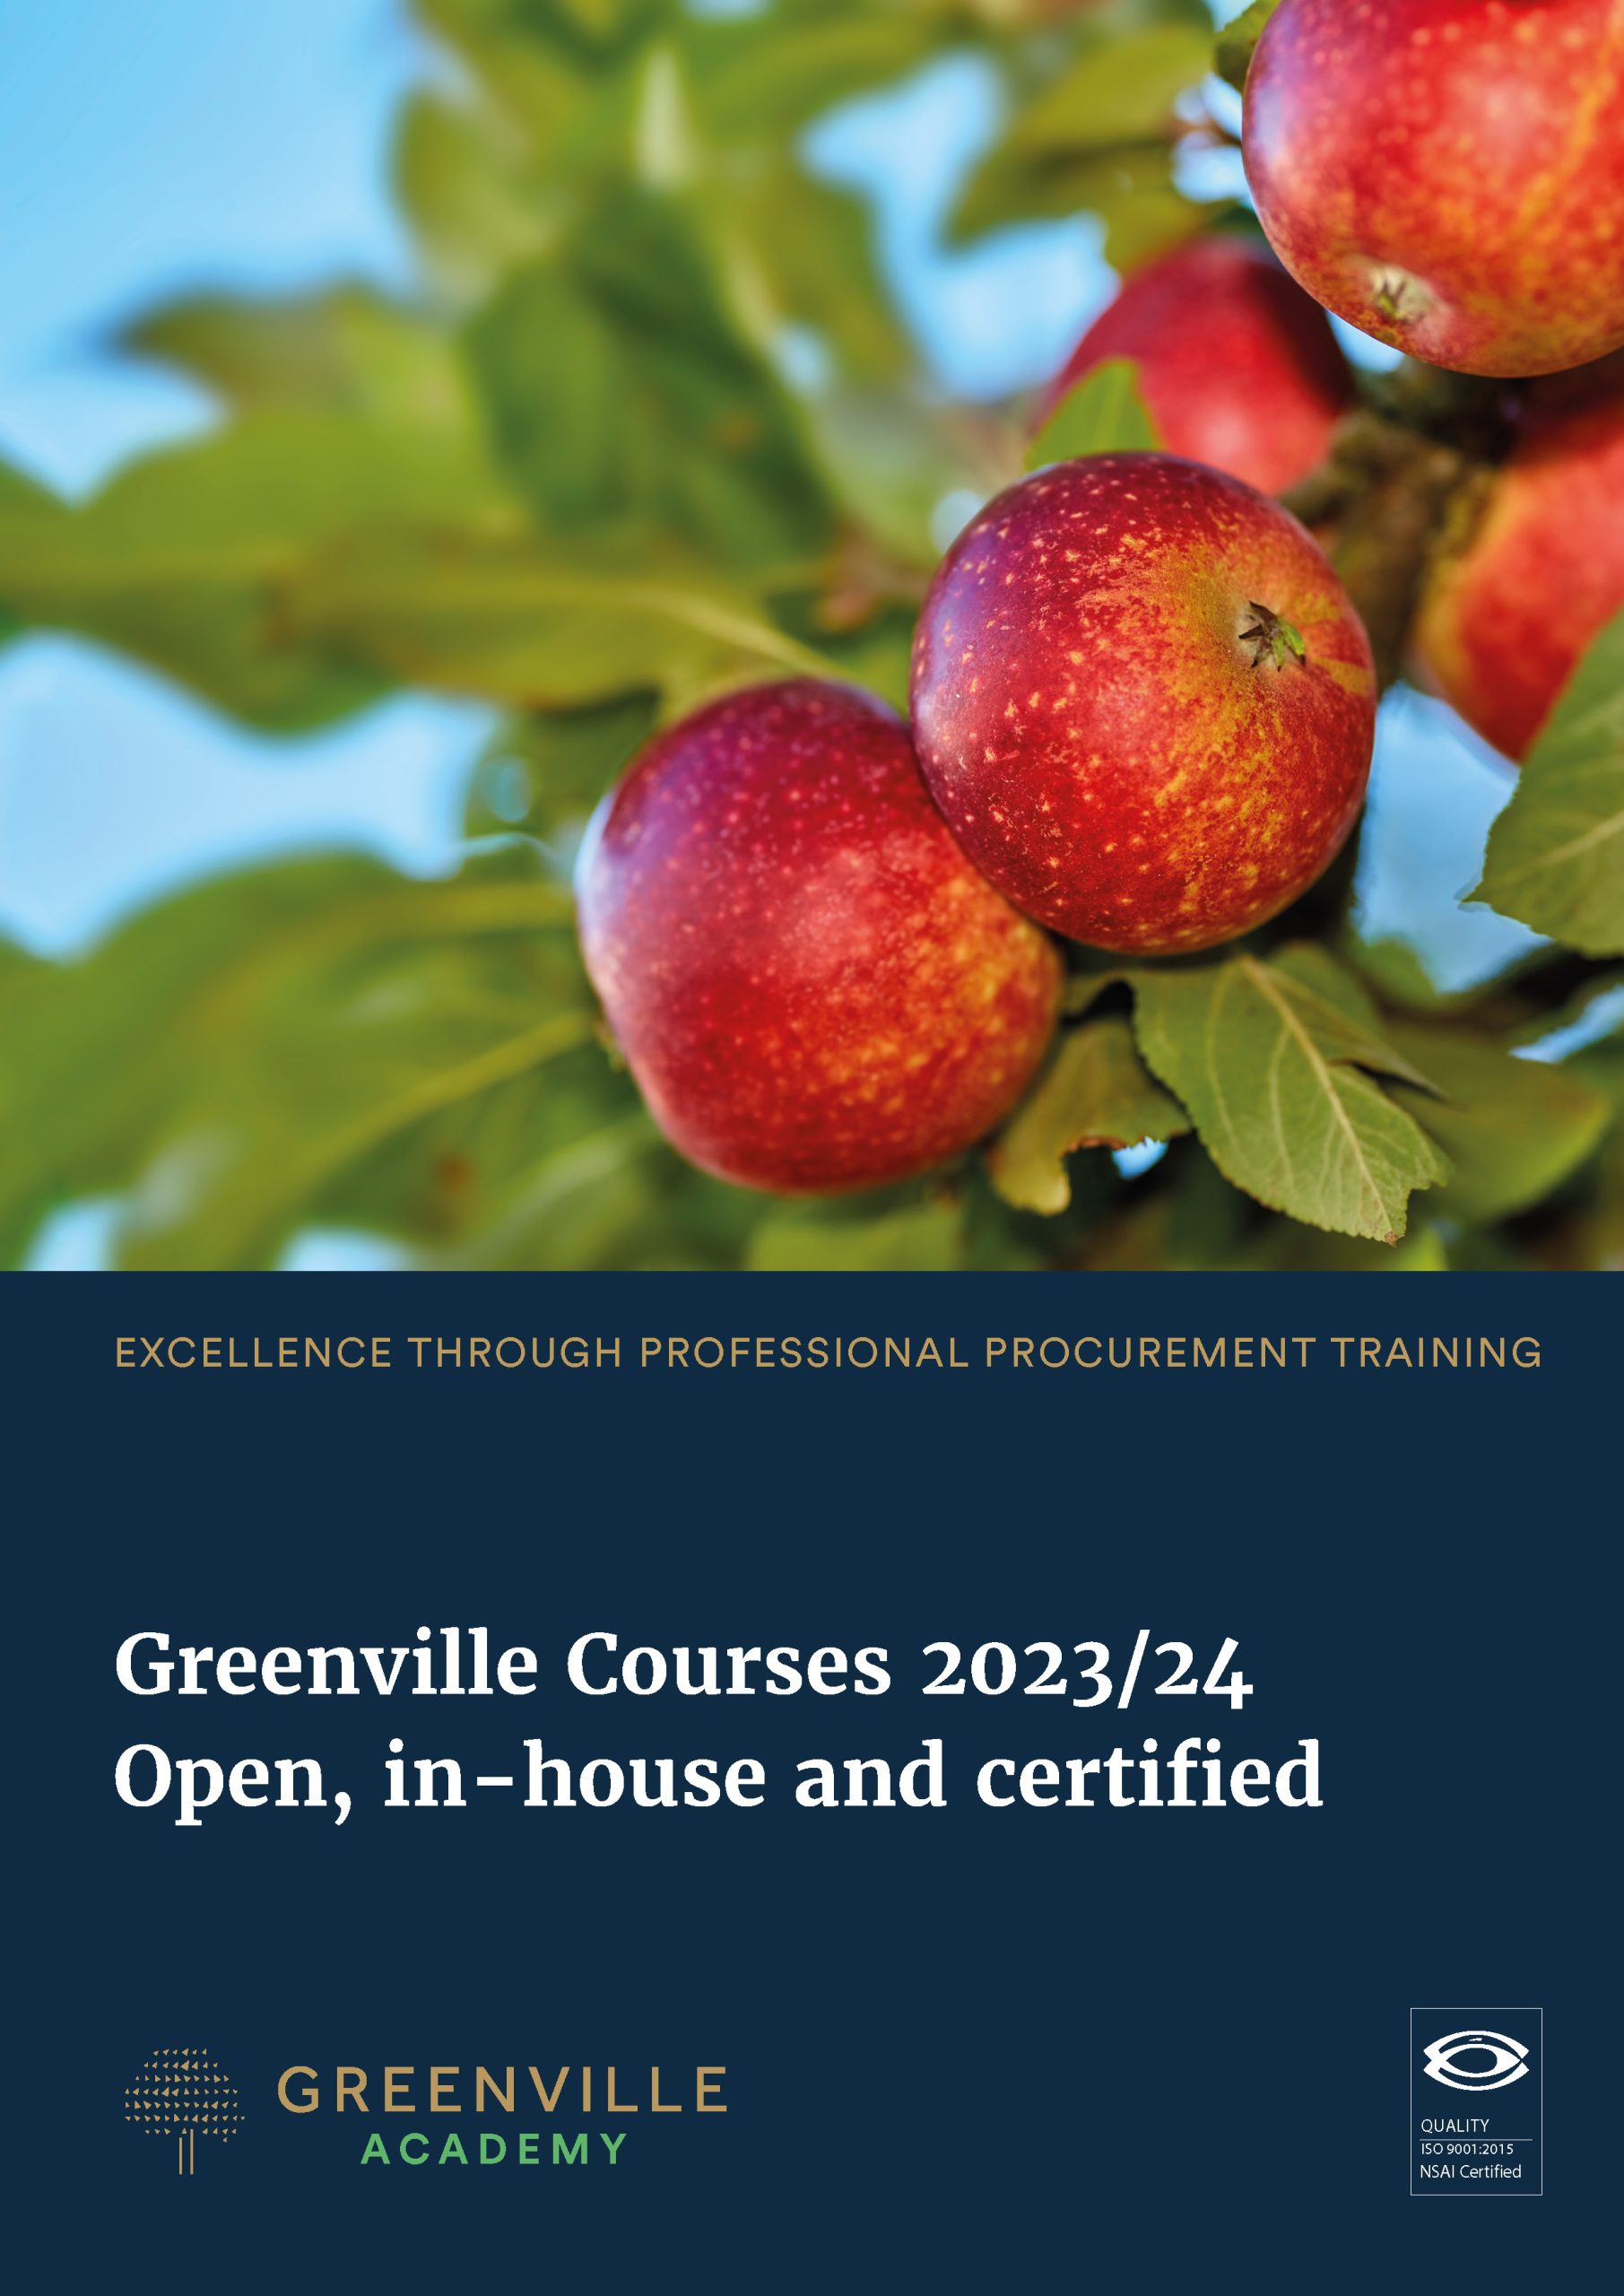 Training Brochure cover with apples